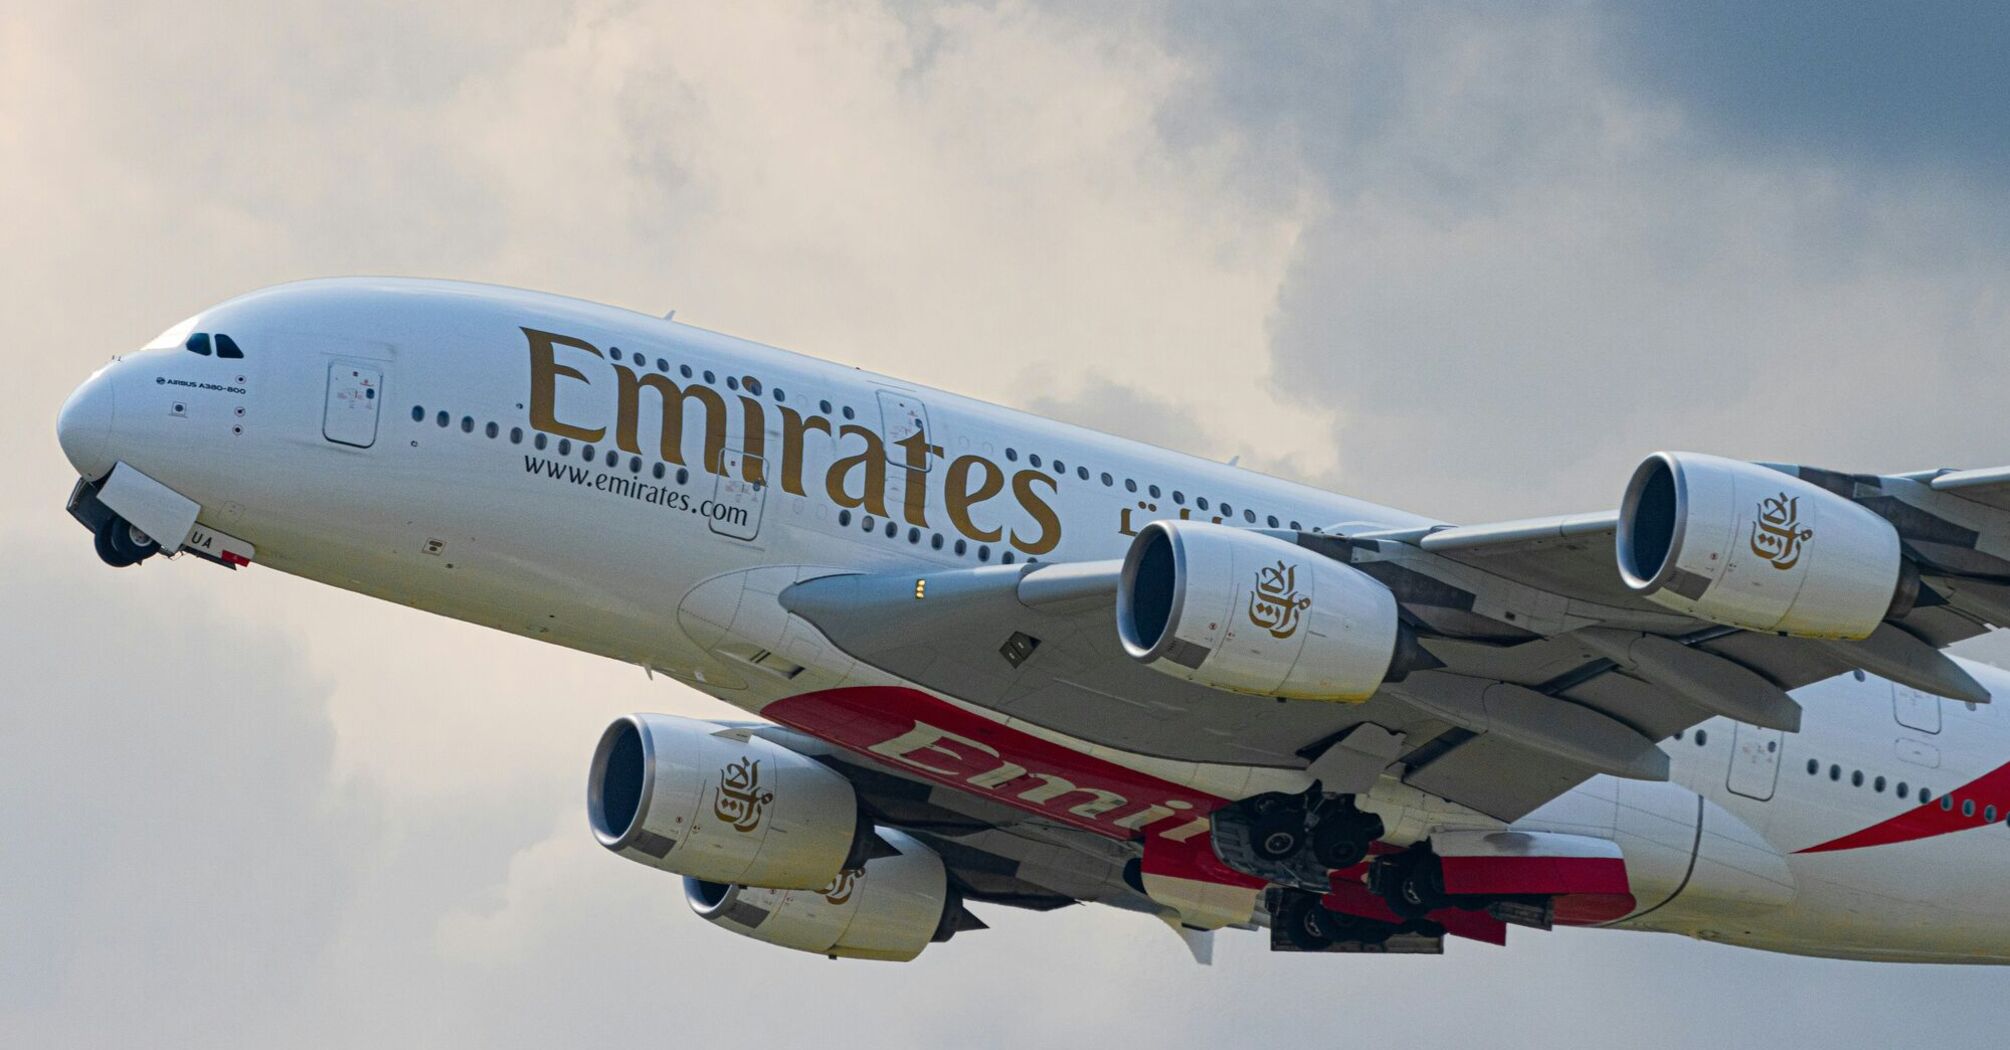 Emirates white and red passenger plane in the sky